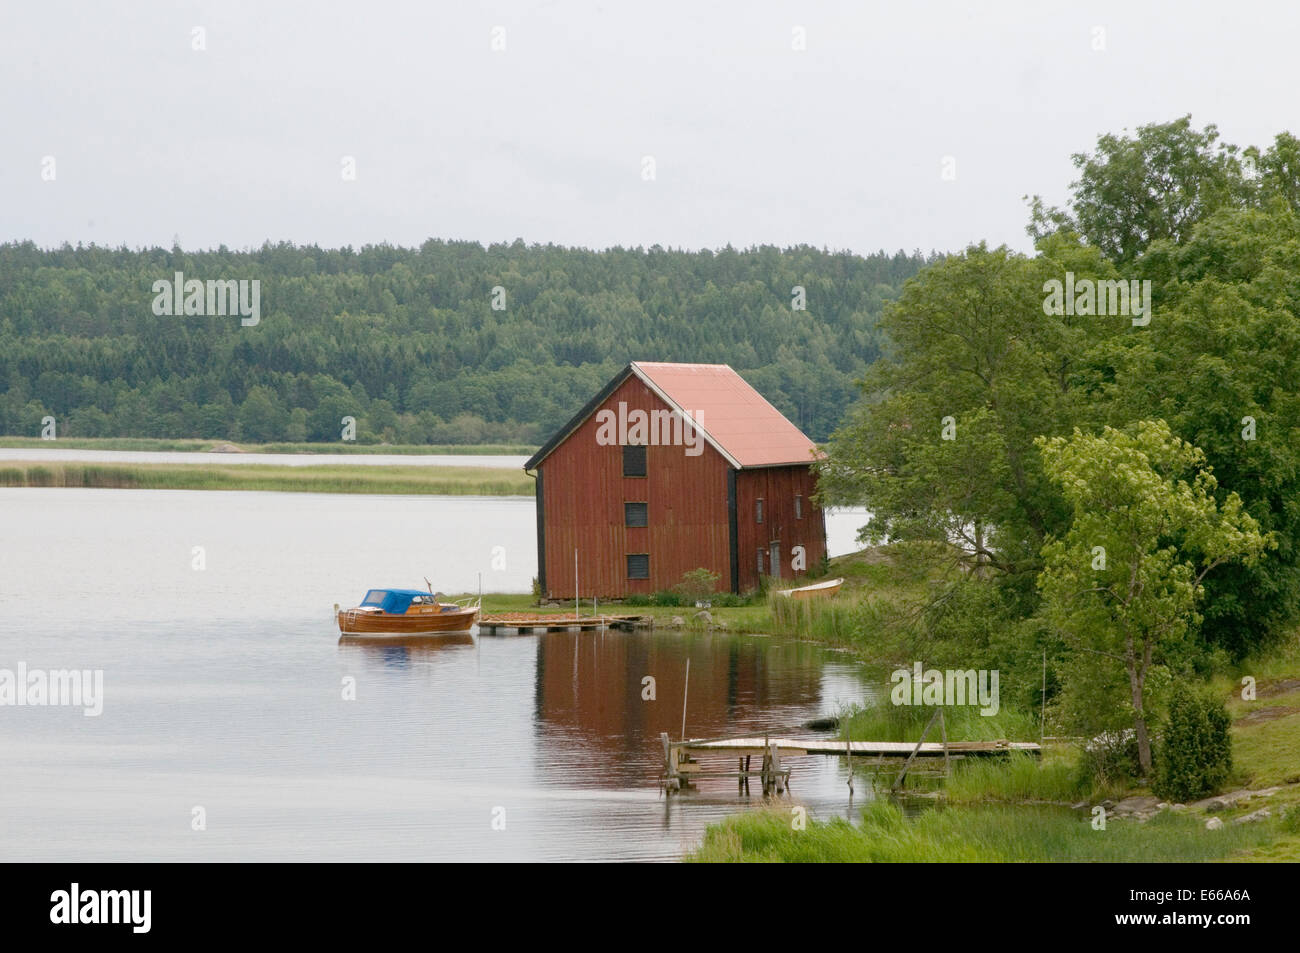 swedish lake lakes sweden boat house red falun paint Stock Photo